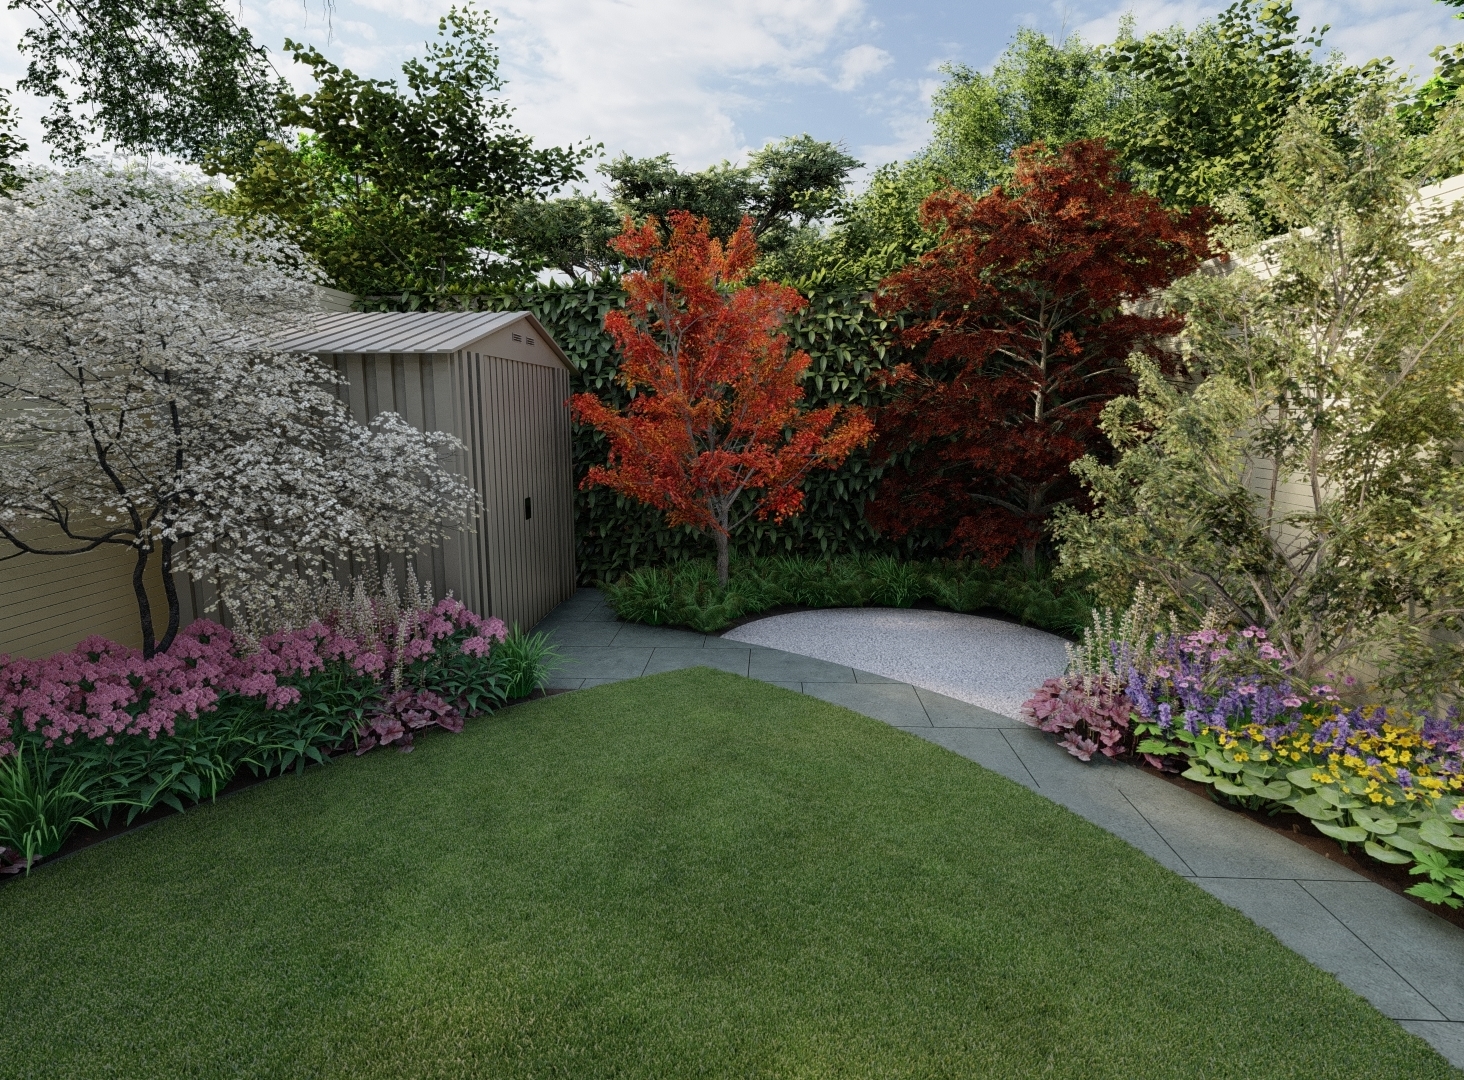 Design Visual for small garden featuring Biohort Shed, Bespoke Garden Fencing, sweeping Limestone pathway, roll turf grass area, Specimen trees and Limestone Patio